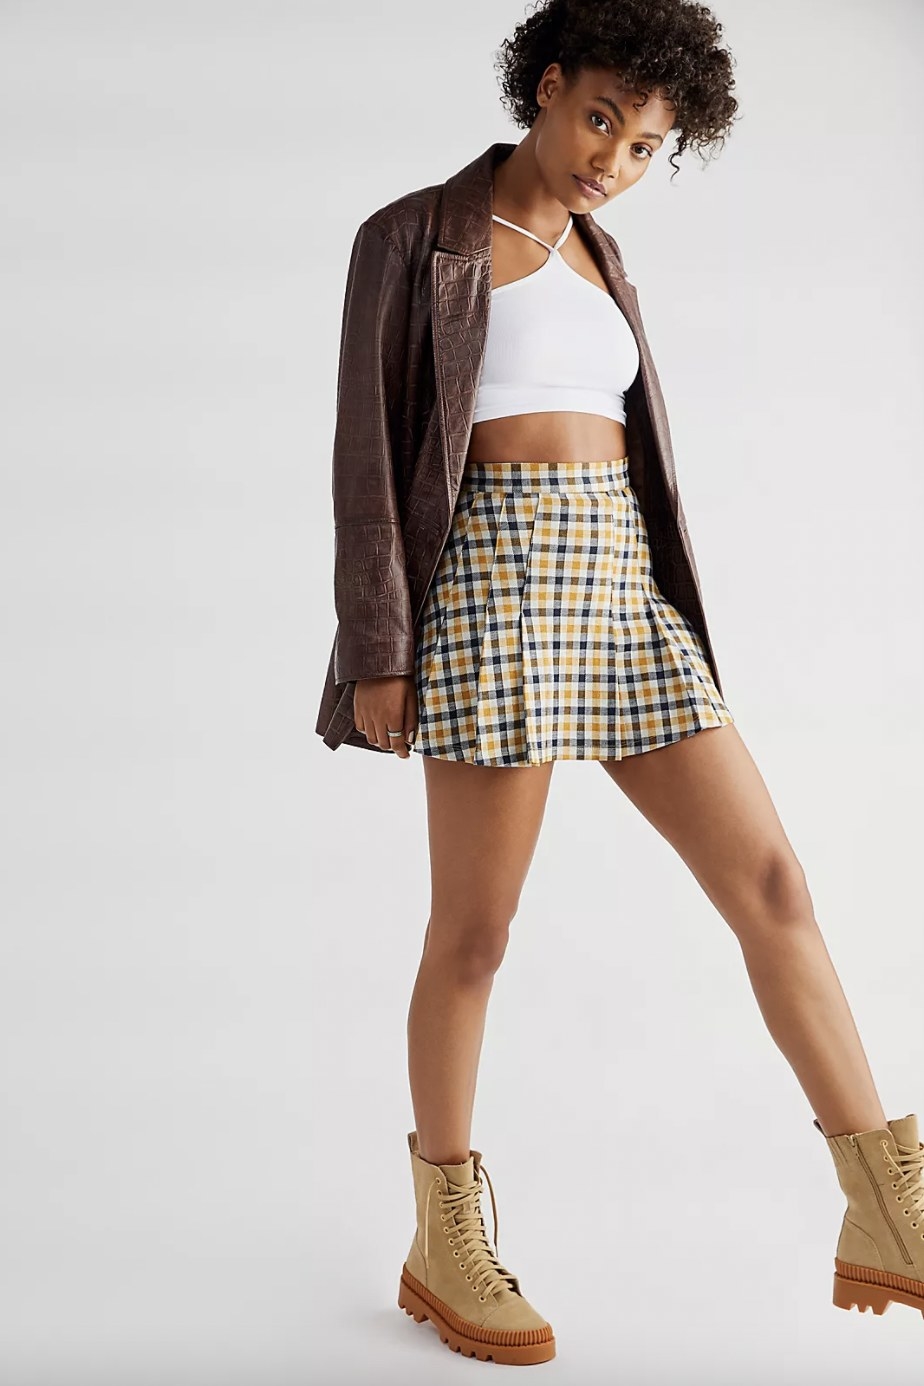 A woman wearing a brown jacket, a white shirt, a gingham print skirt and brown boots